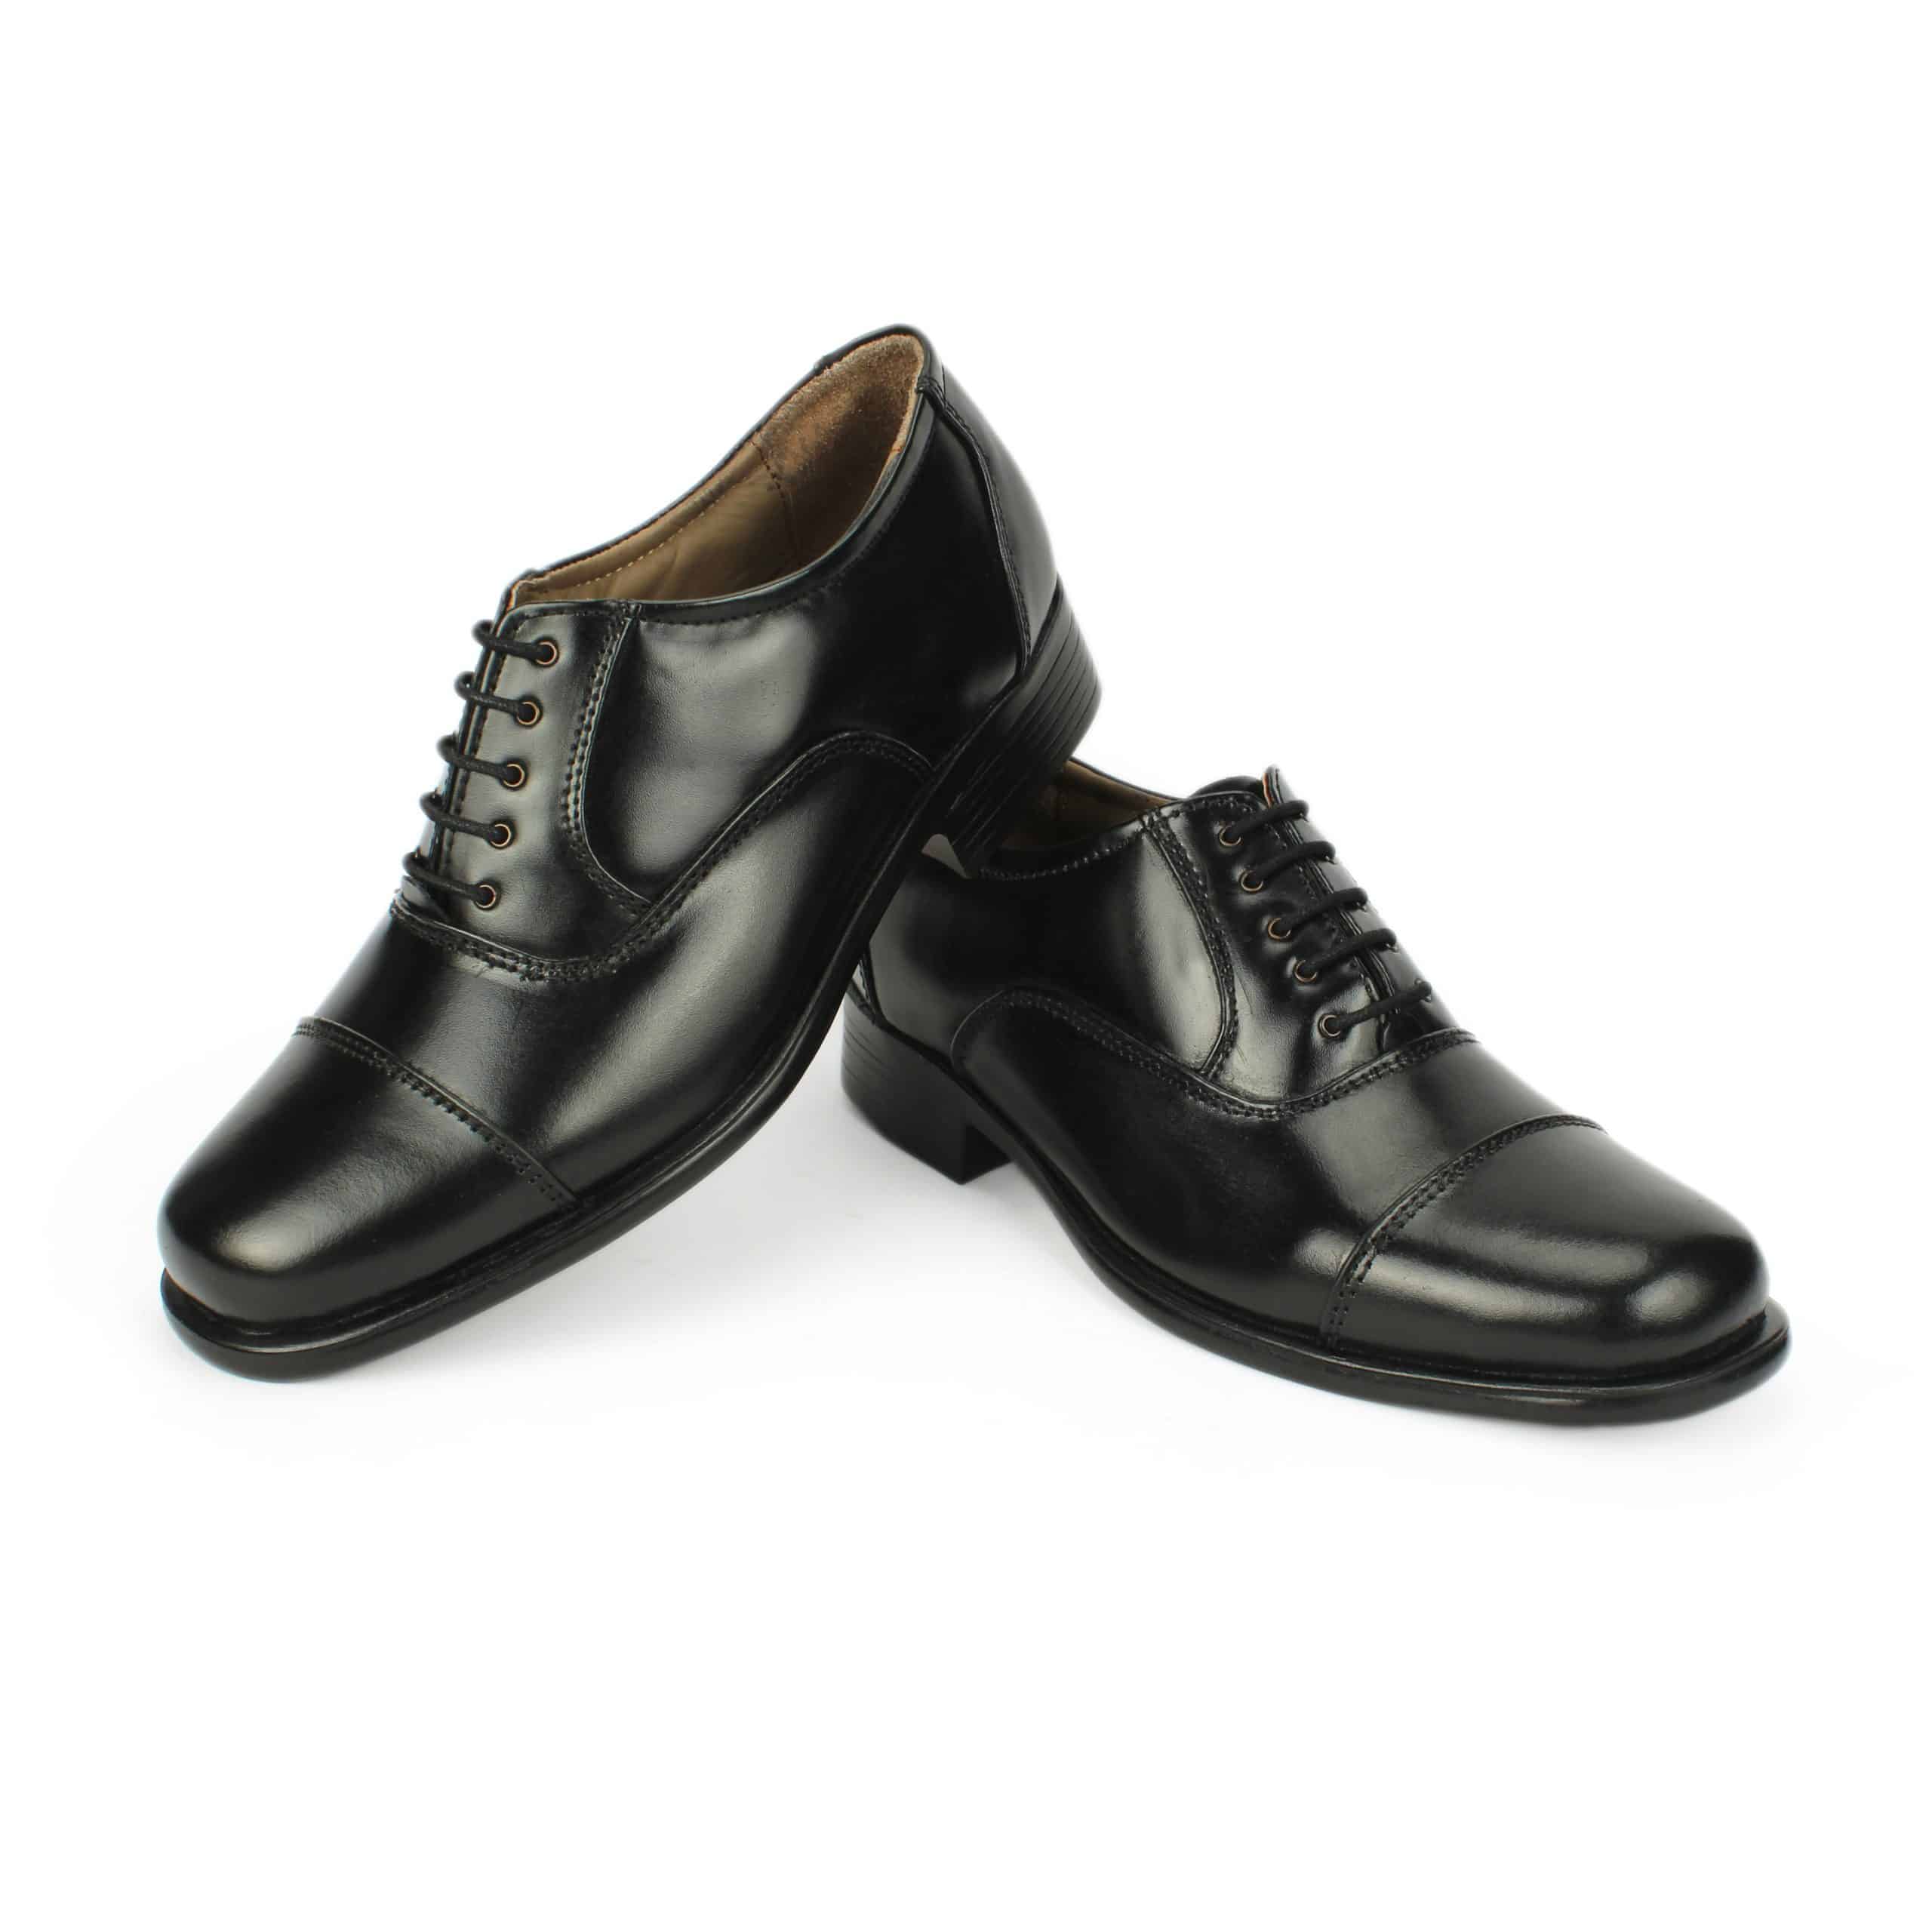 Police Shoes Black In 100% Real Leather